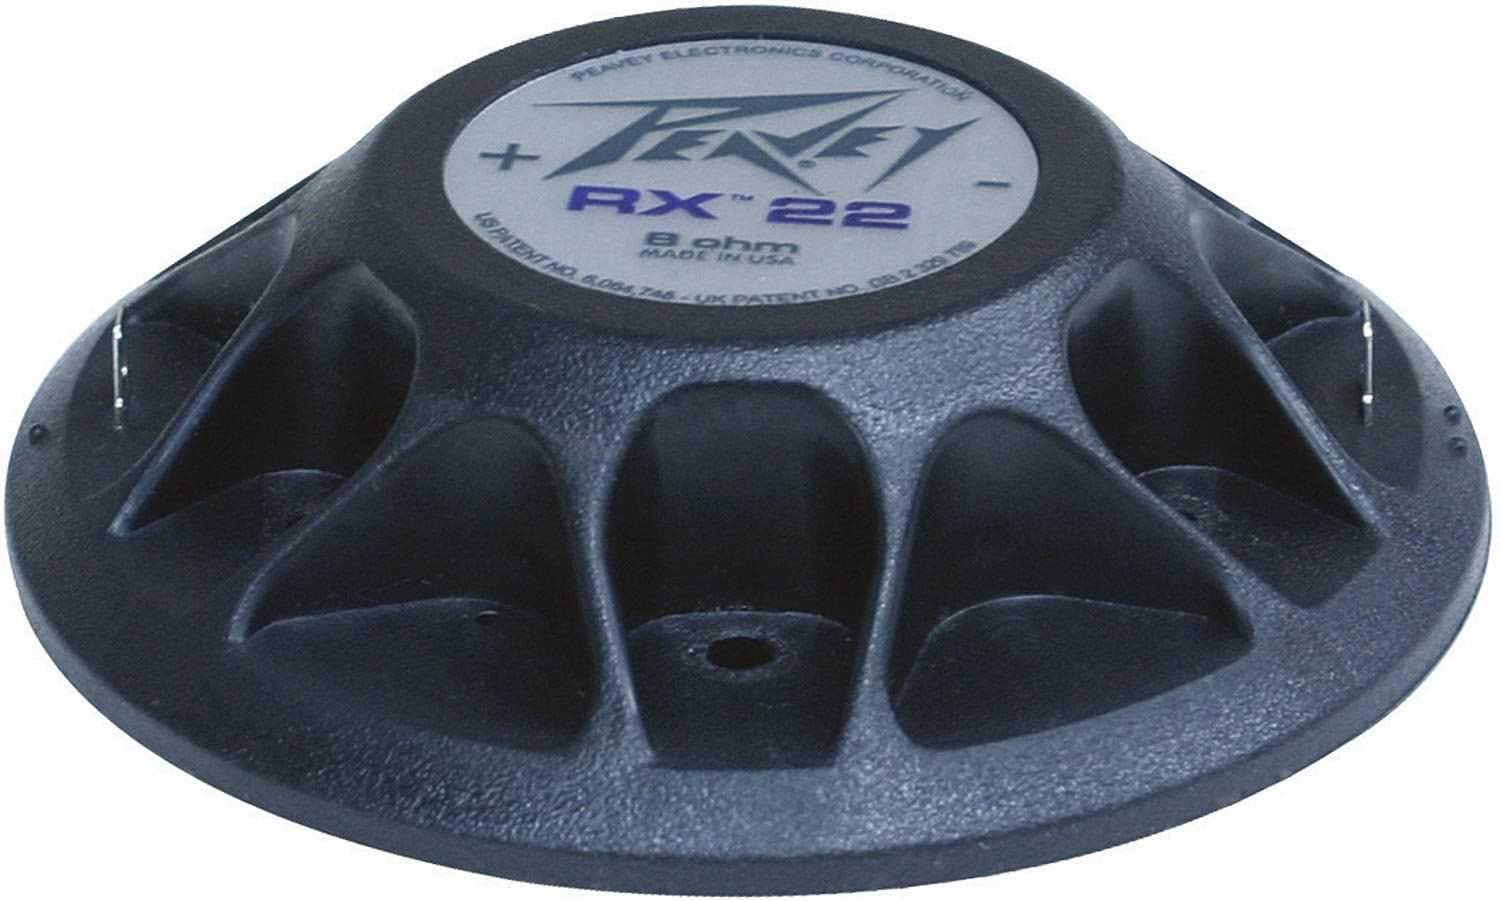 Peavey RX22 Replacement Compression Driver - ProSound and Stage Lighting